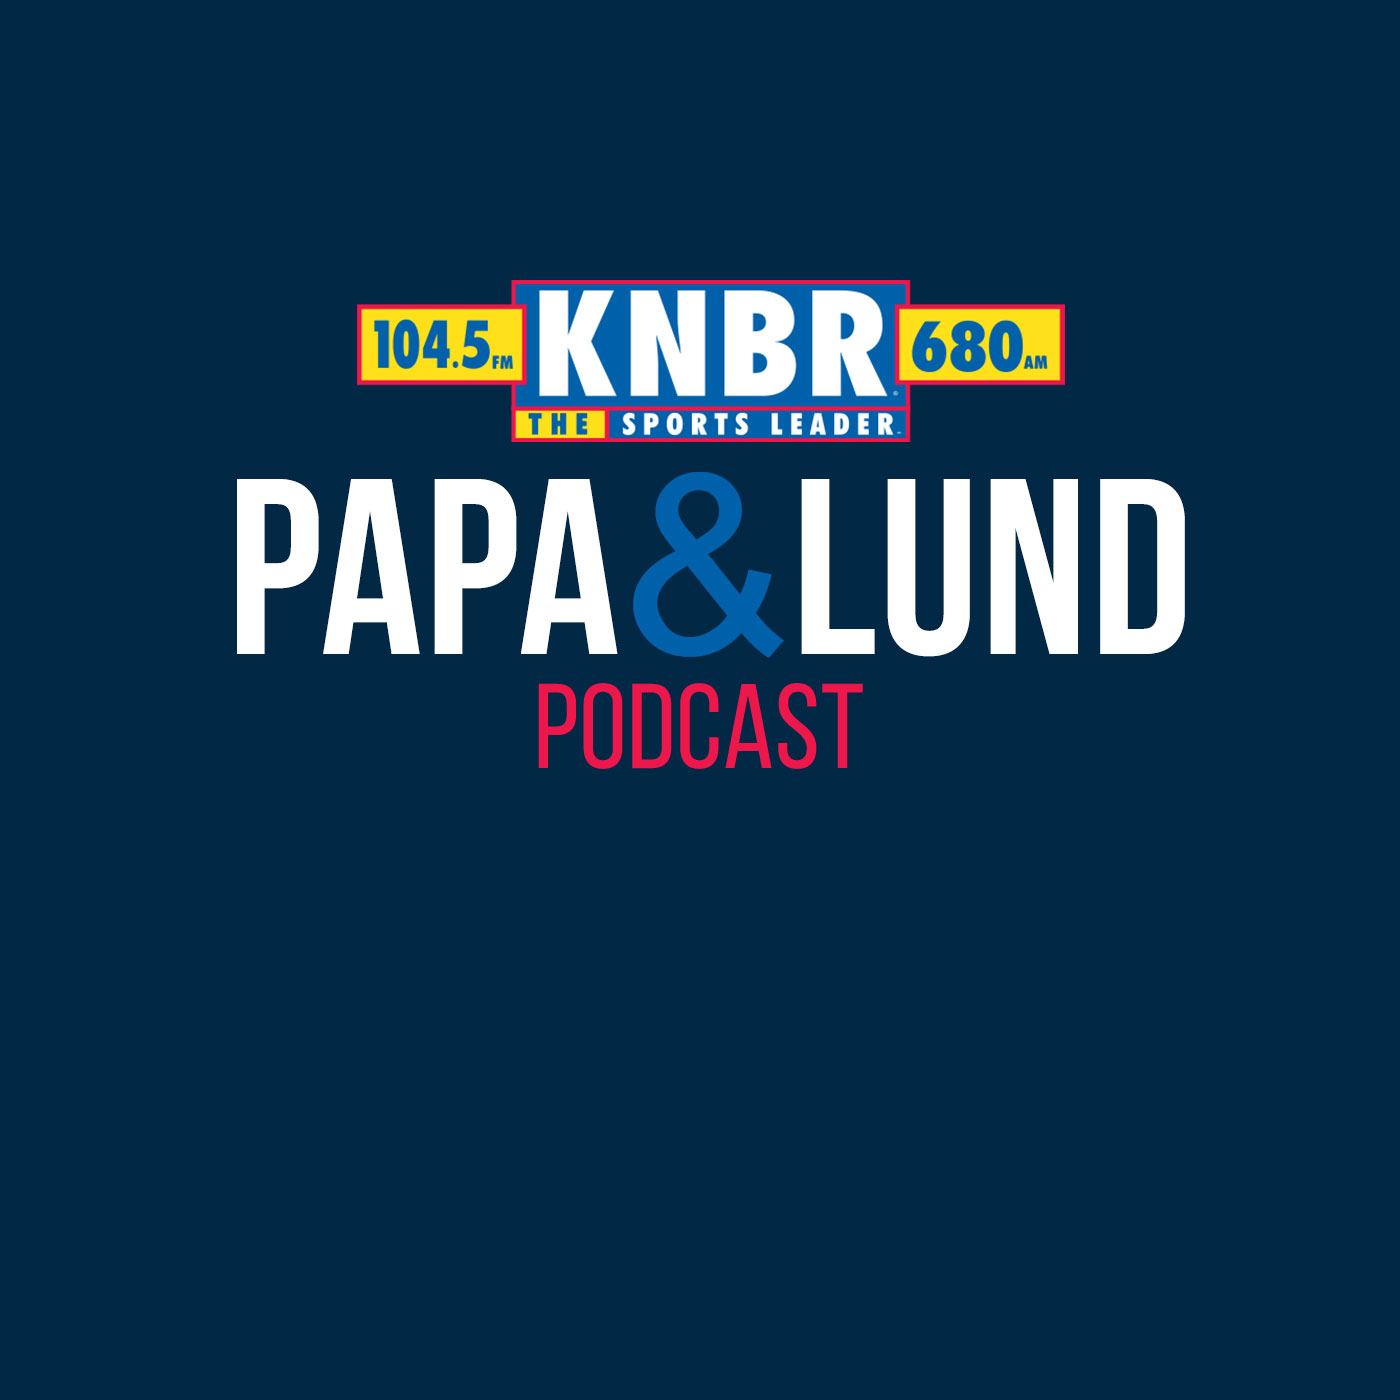 11-15 Brady Quinn joins Papa & Lund to discuss 49ers v Chargers game, Jennings, and NCAA standings